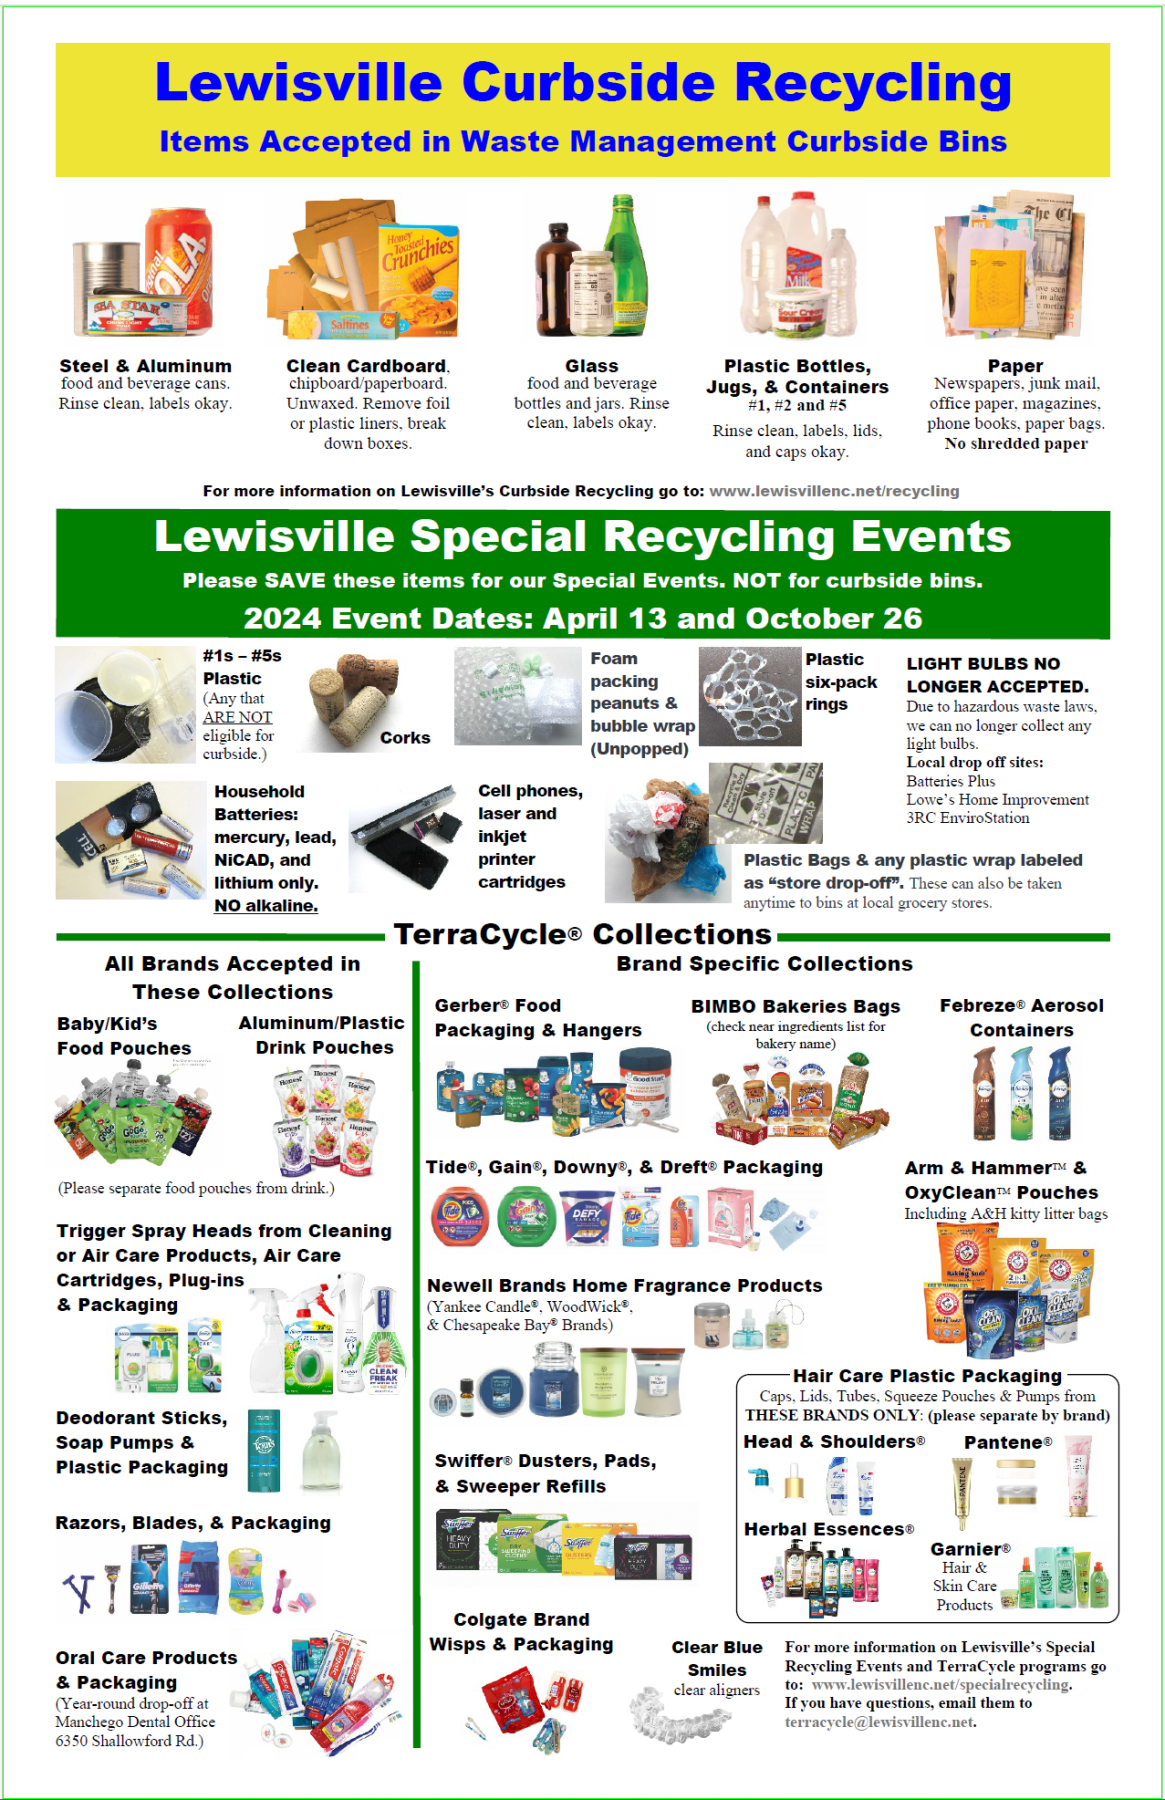 Lewisville curbside and special recycling collections.